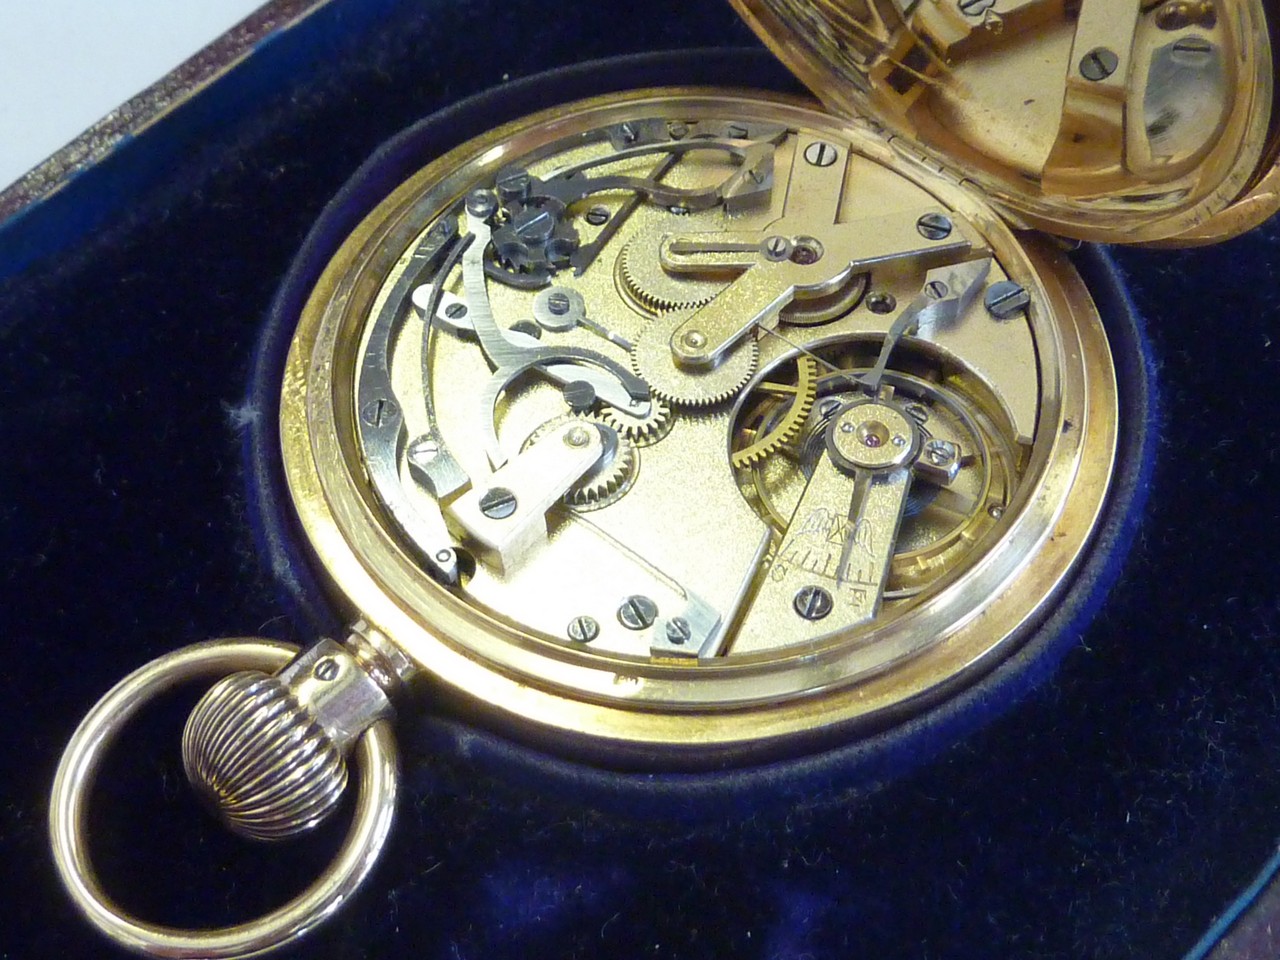 AN 18CT FULL HUNTER FLYBACK CHRONOGRAPH POCKET WATCH, topwind, Longines movement, original J.W. - Image 2 of 3